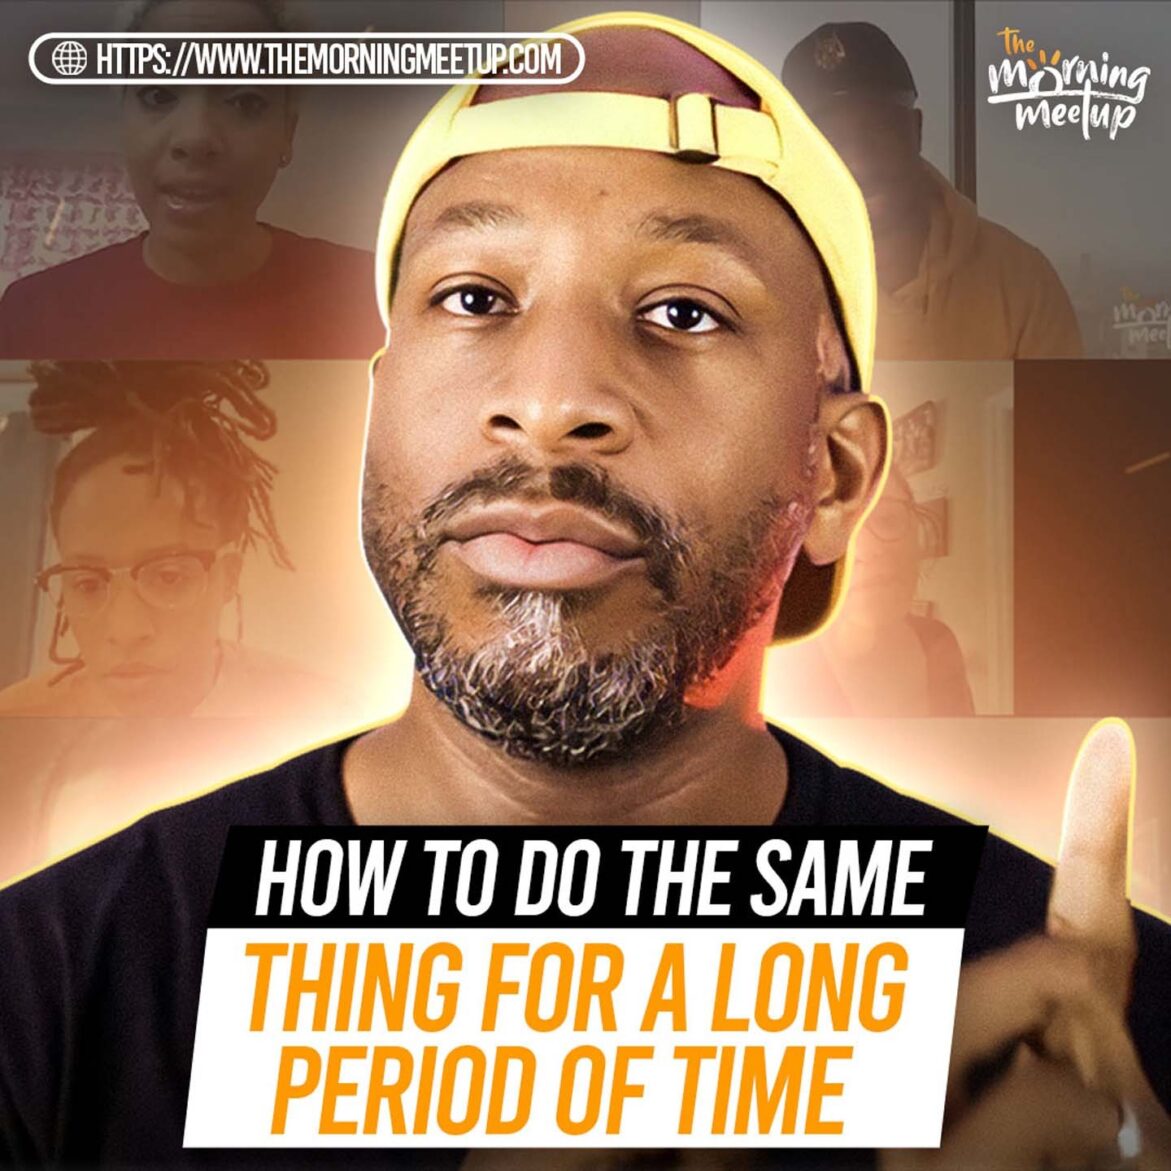 Black Podcasting - How To Do The Same Thing For A Long Time - David Shands